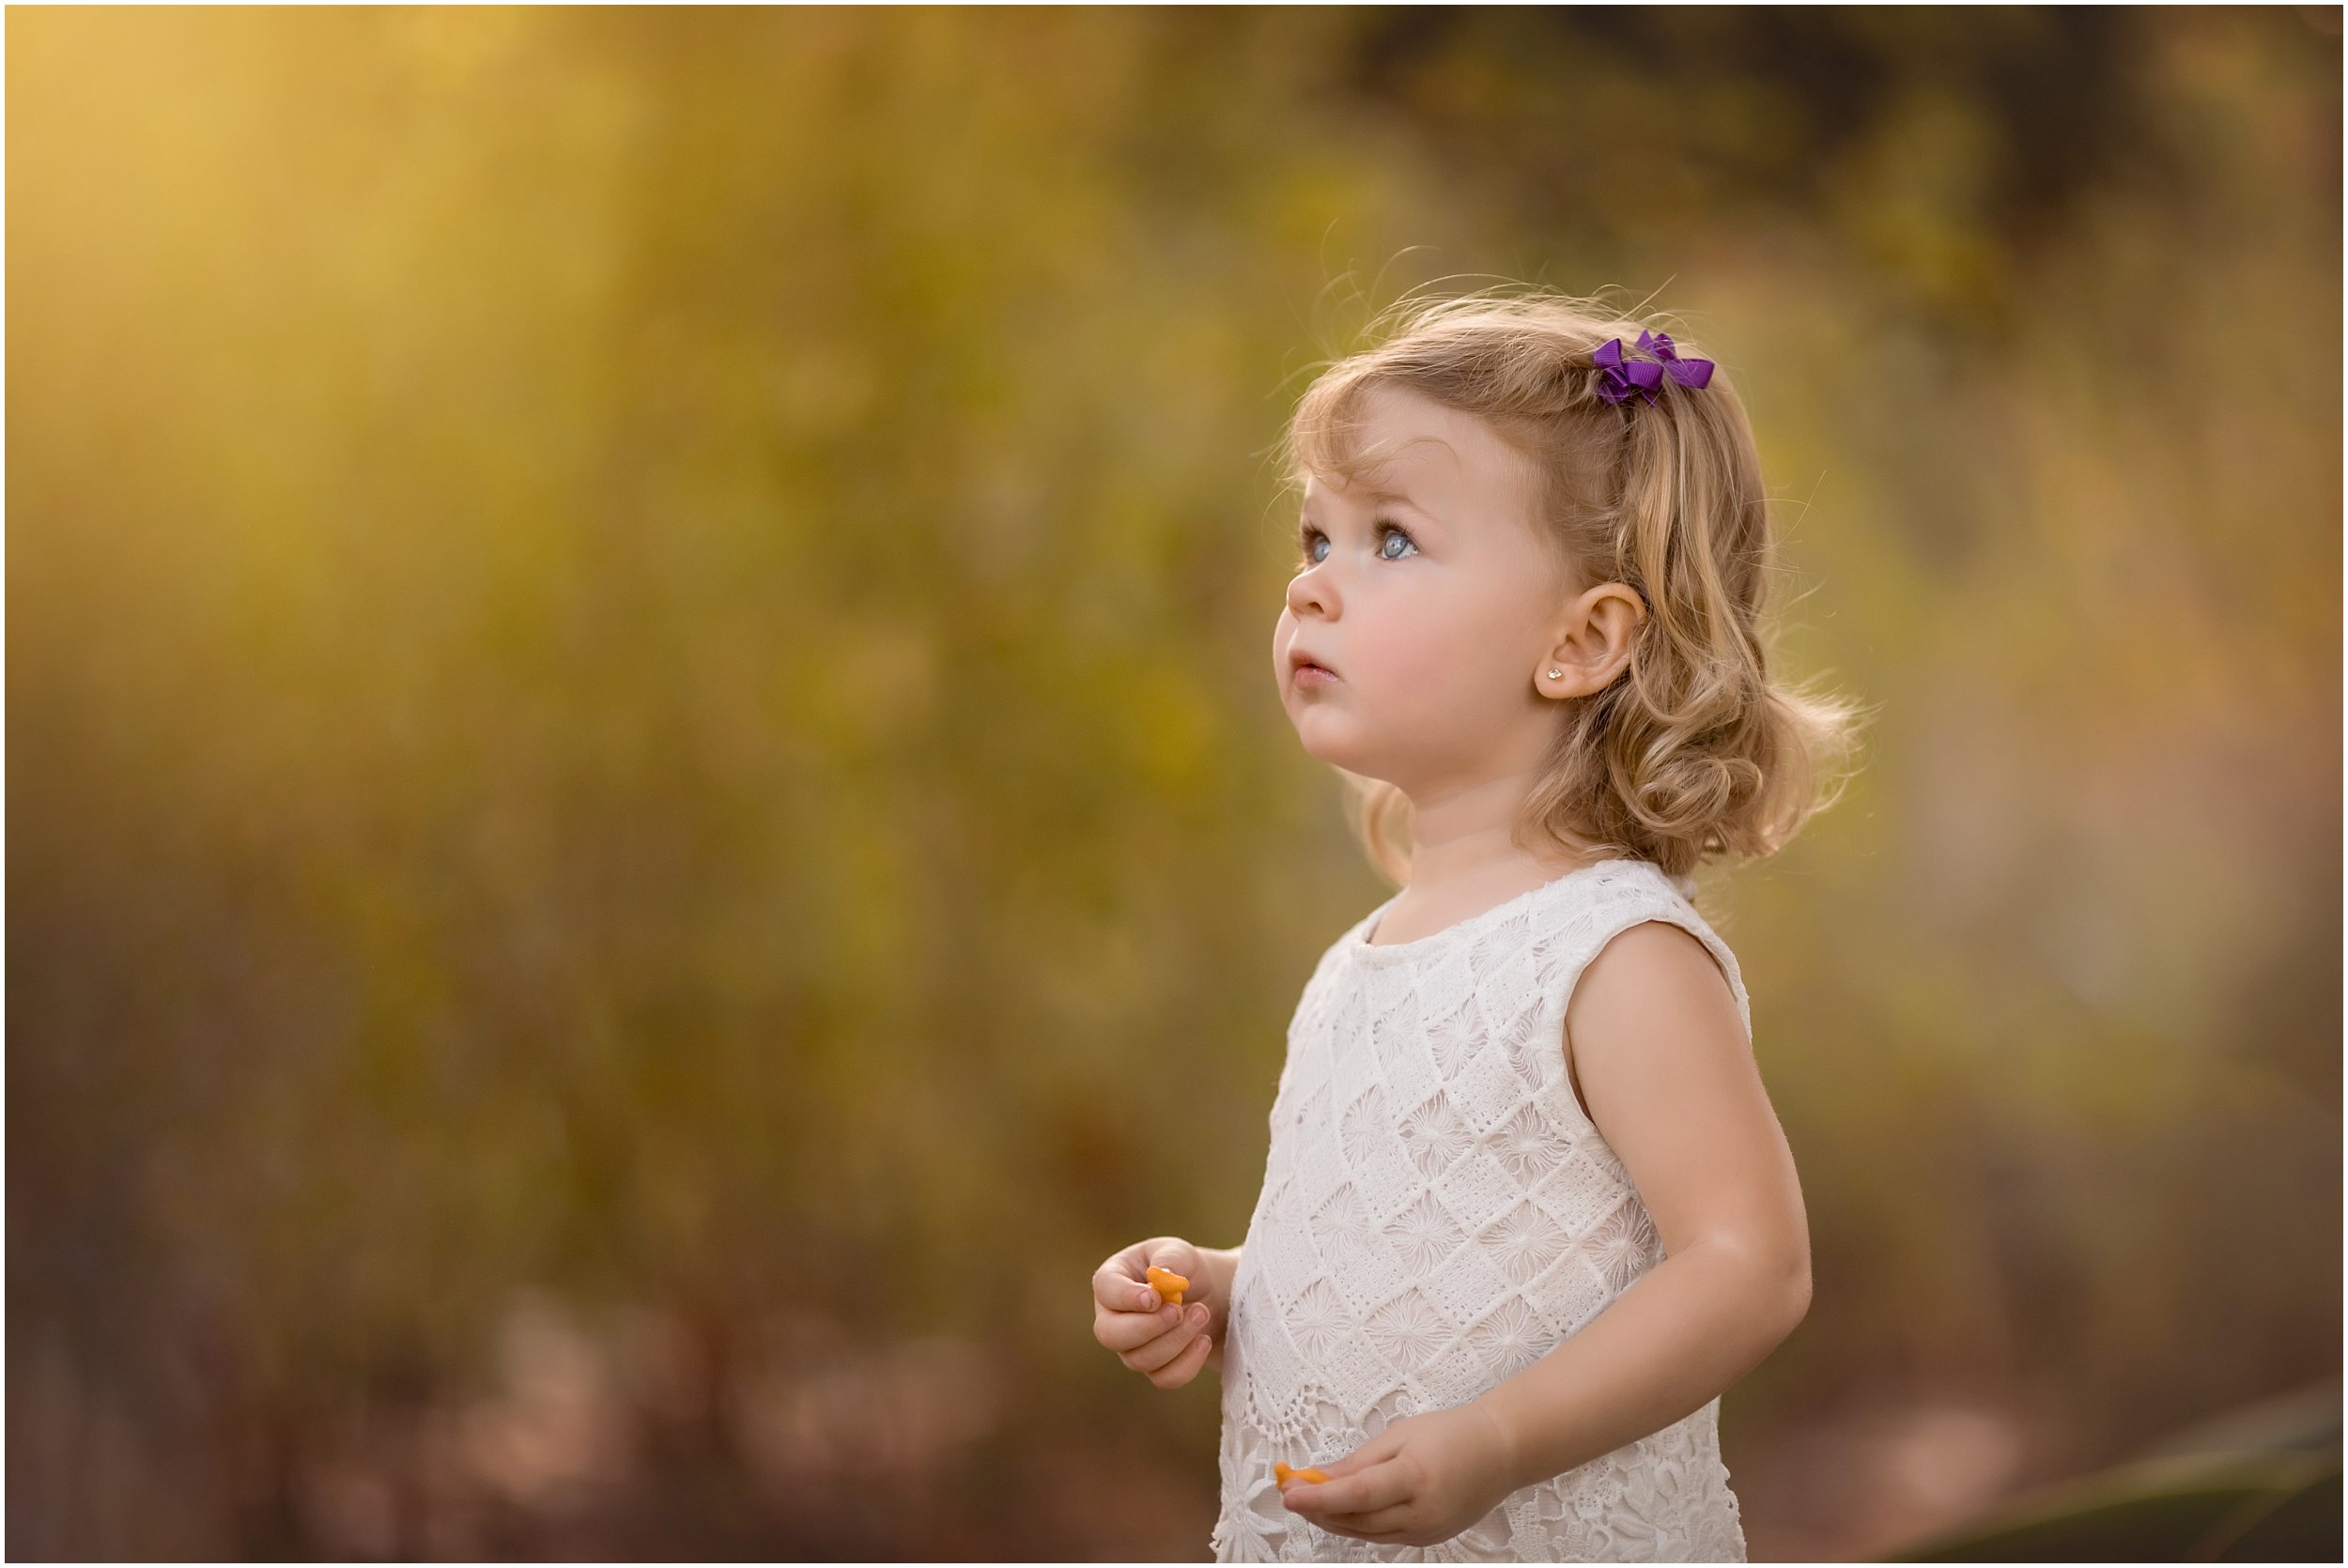 Pasadena Children's Photographer - 2 Year Session - A Pocket of Time ...